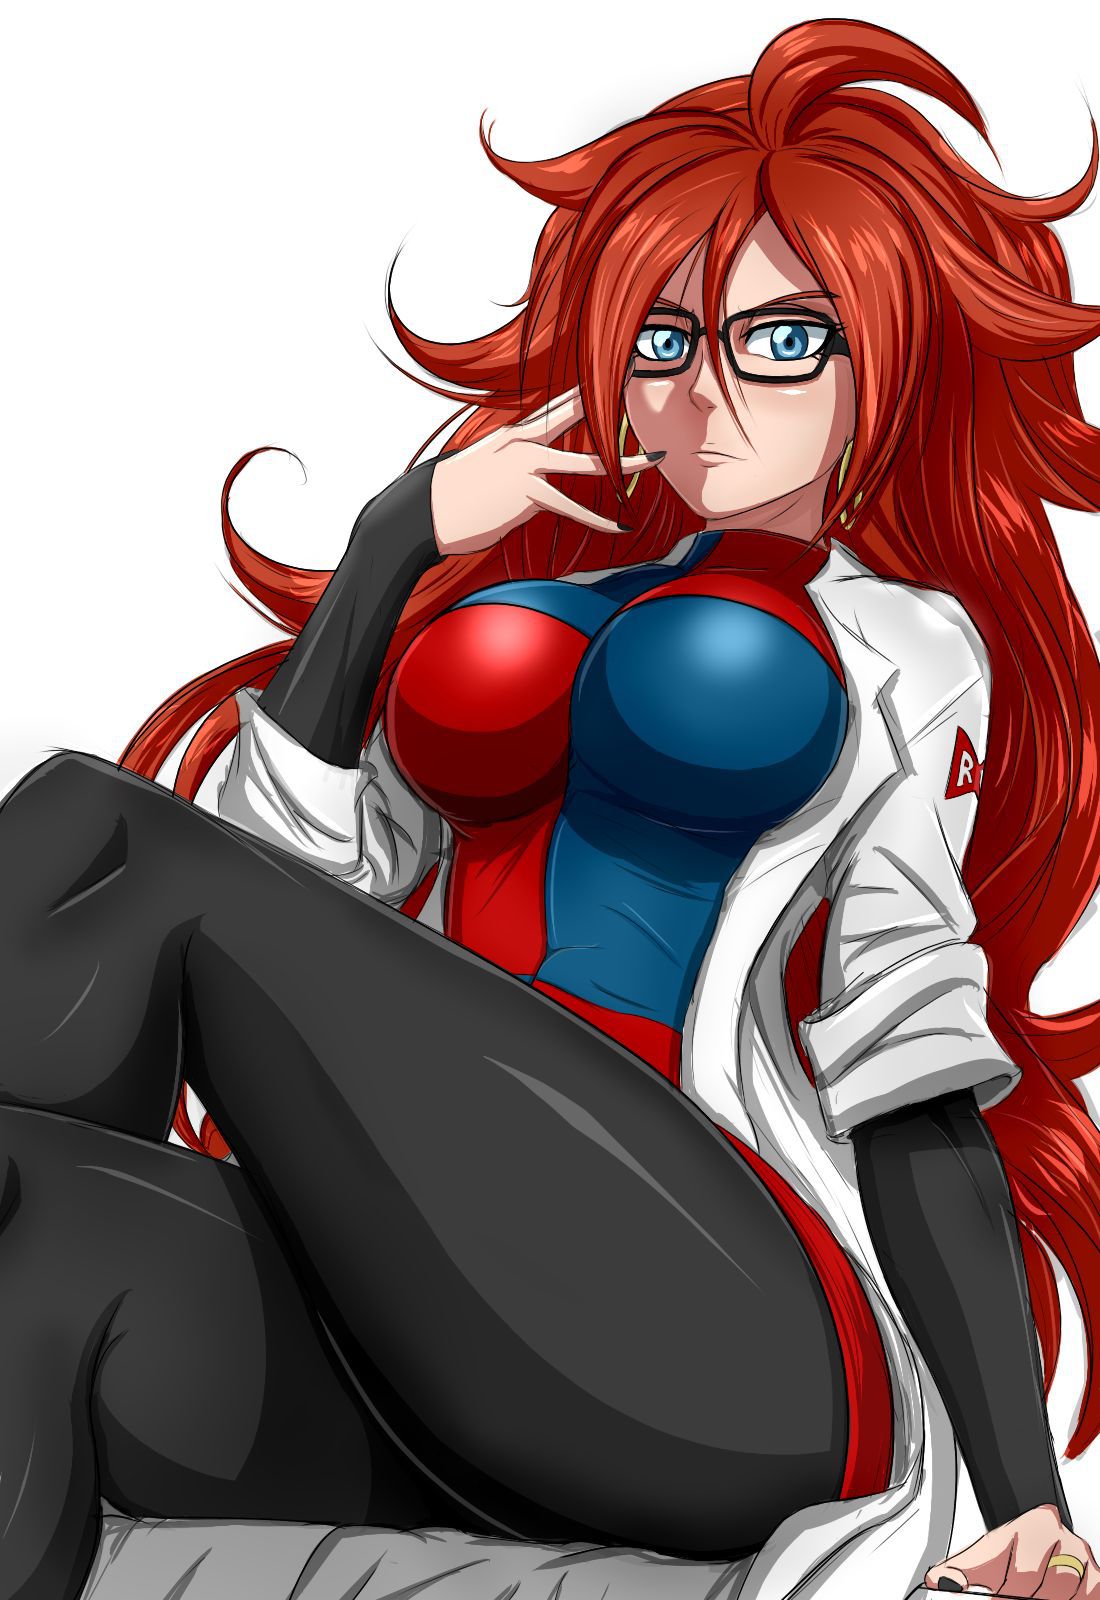 My Favorite Android 21 Pics 62